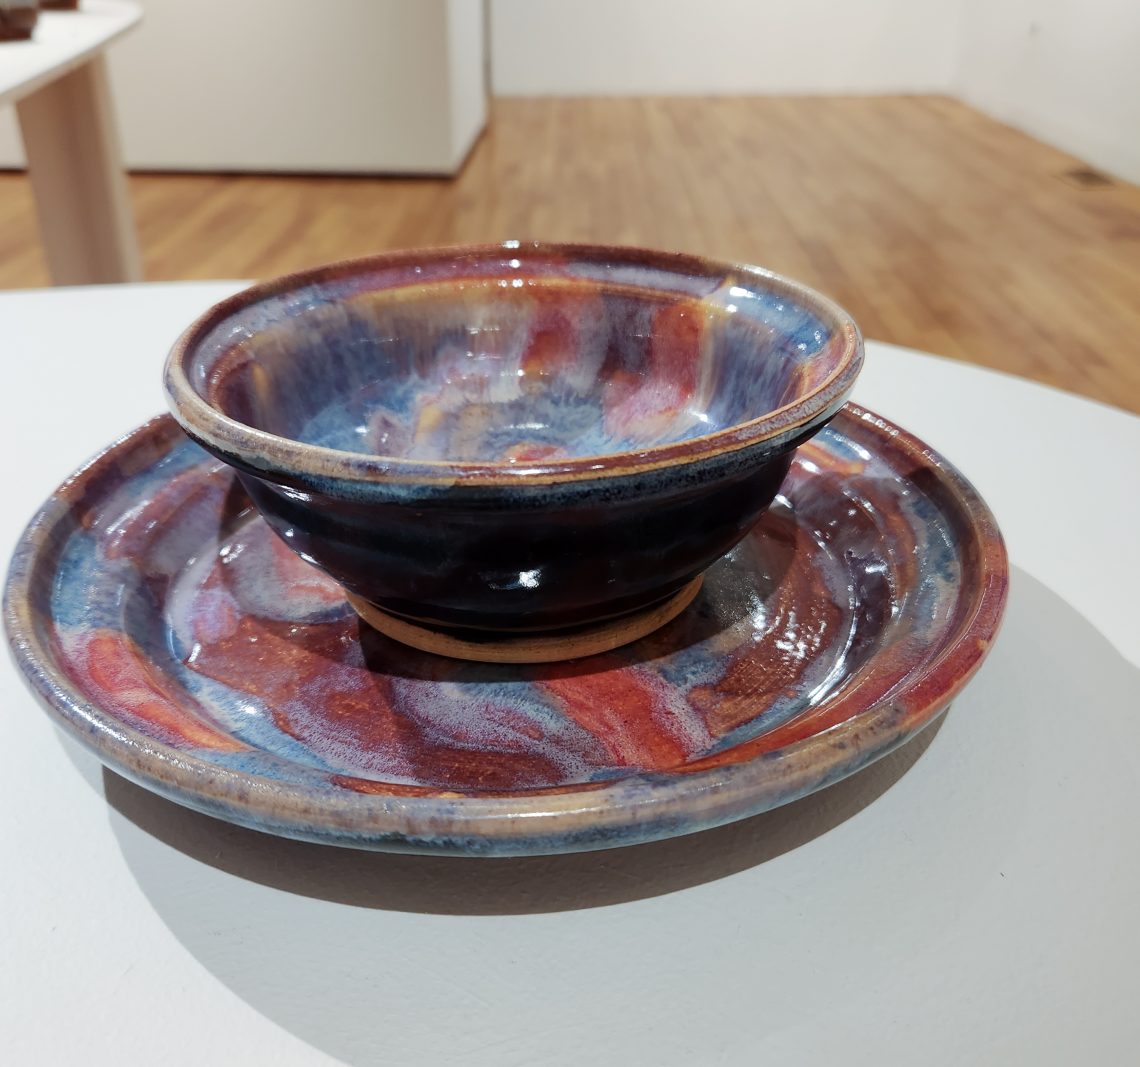 Annika Soderberg "Koi Pond Plate" 2023. Stoneware, 9in. long x 9in. wide x 1 1/4in deep. 

'Koi Pond Bowl" 2023. Stoneware, 6in long x 6in wide x 2 1/2 in deep.Part of the "2023 Bachelor of Fine Arts and Bachelor of Arts Exhibition," University of Southern Maine Art Gallery.